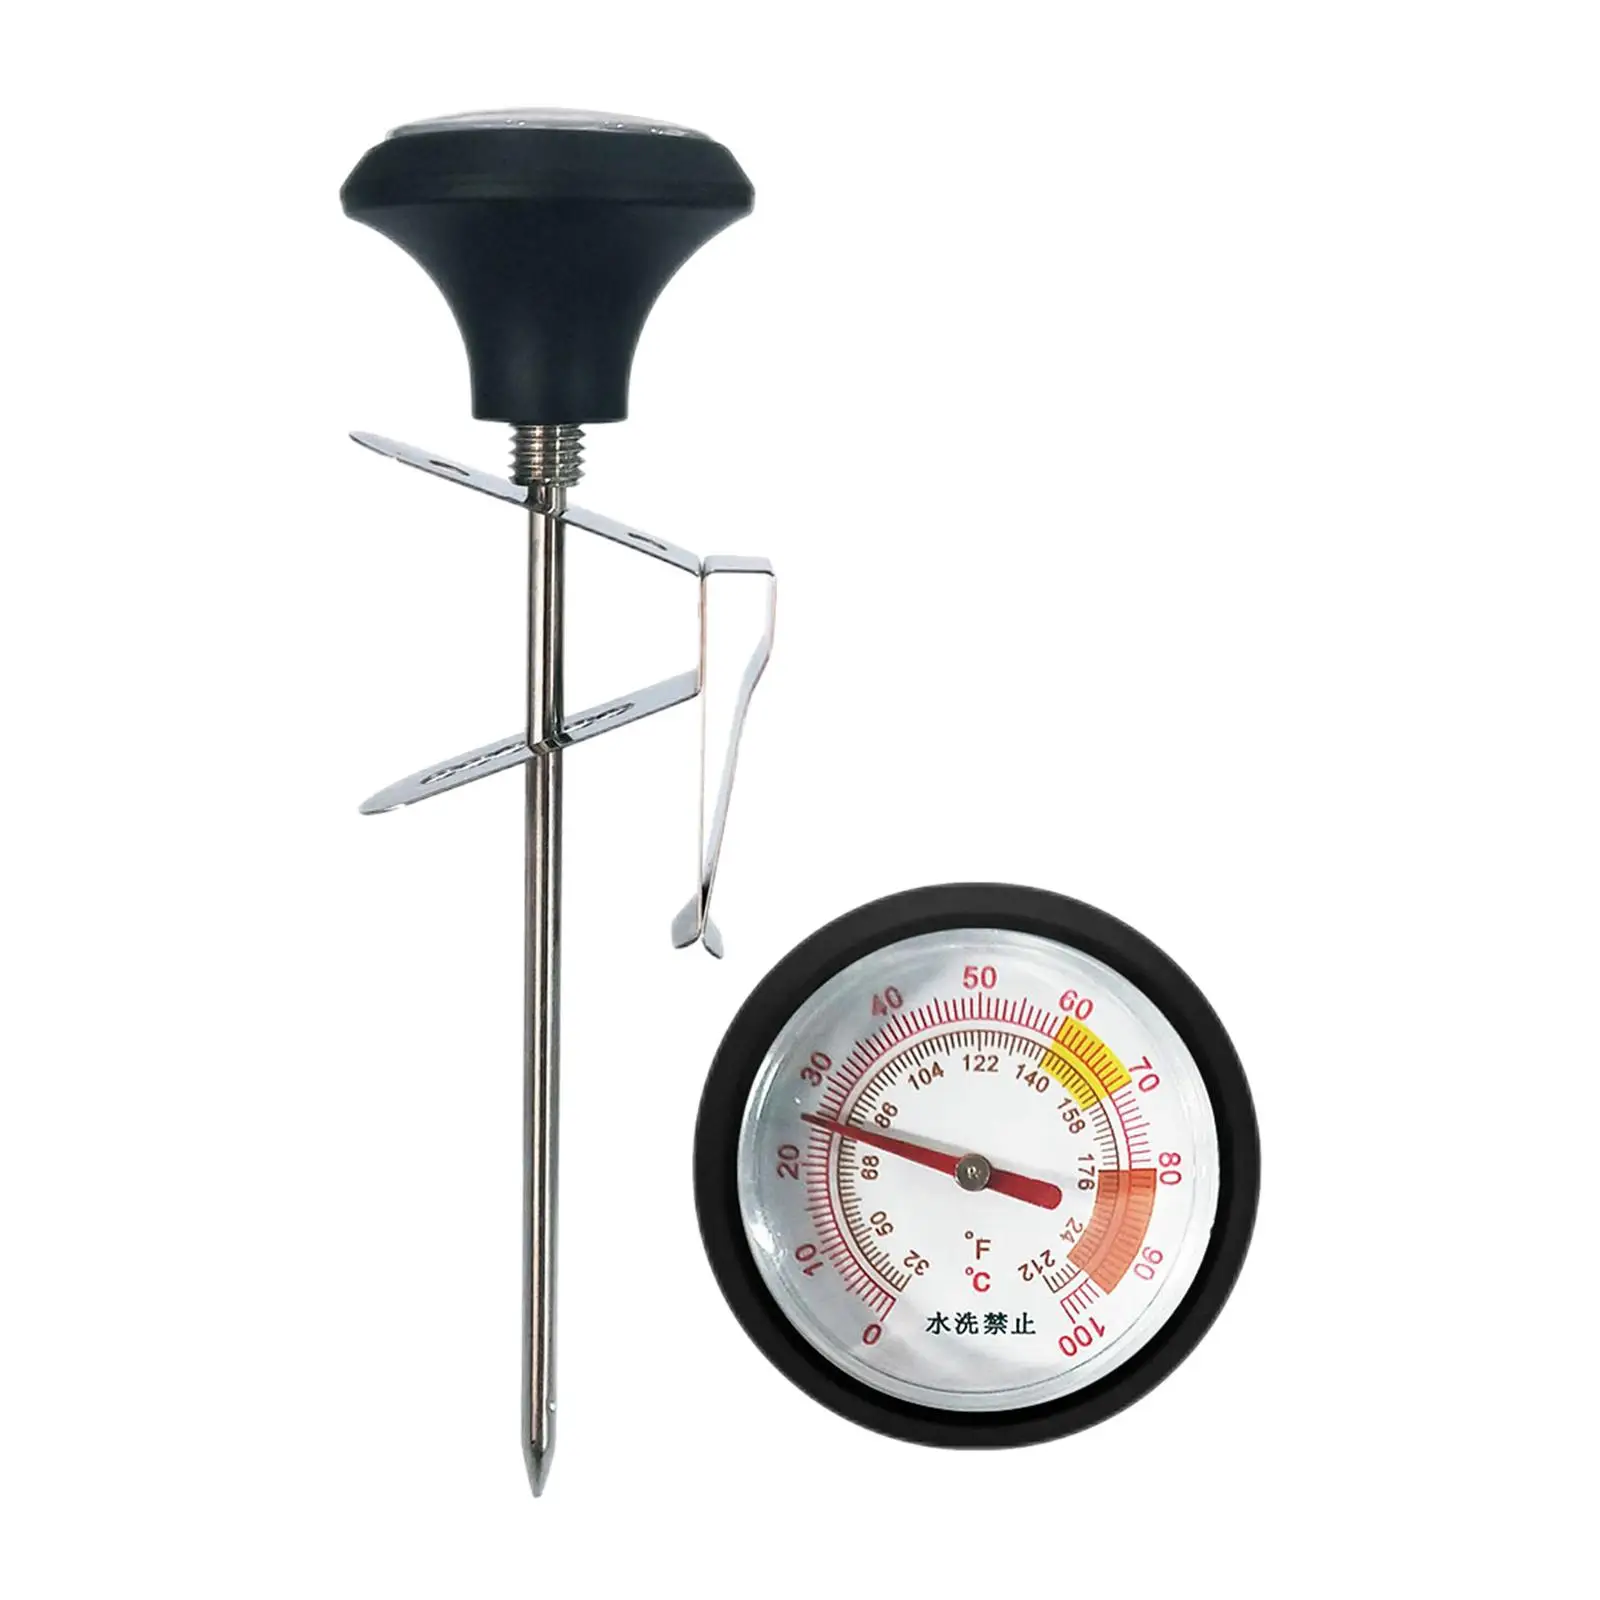 Kitchen Food Probe Thermometer Meat Cooking Dial Thermometer for Oven BBQ